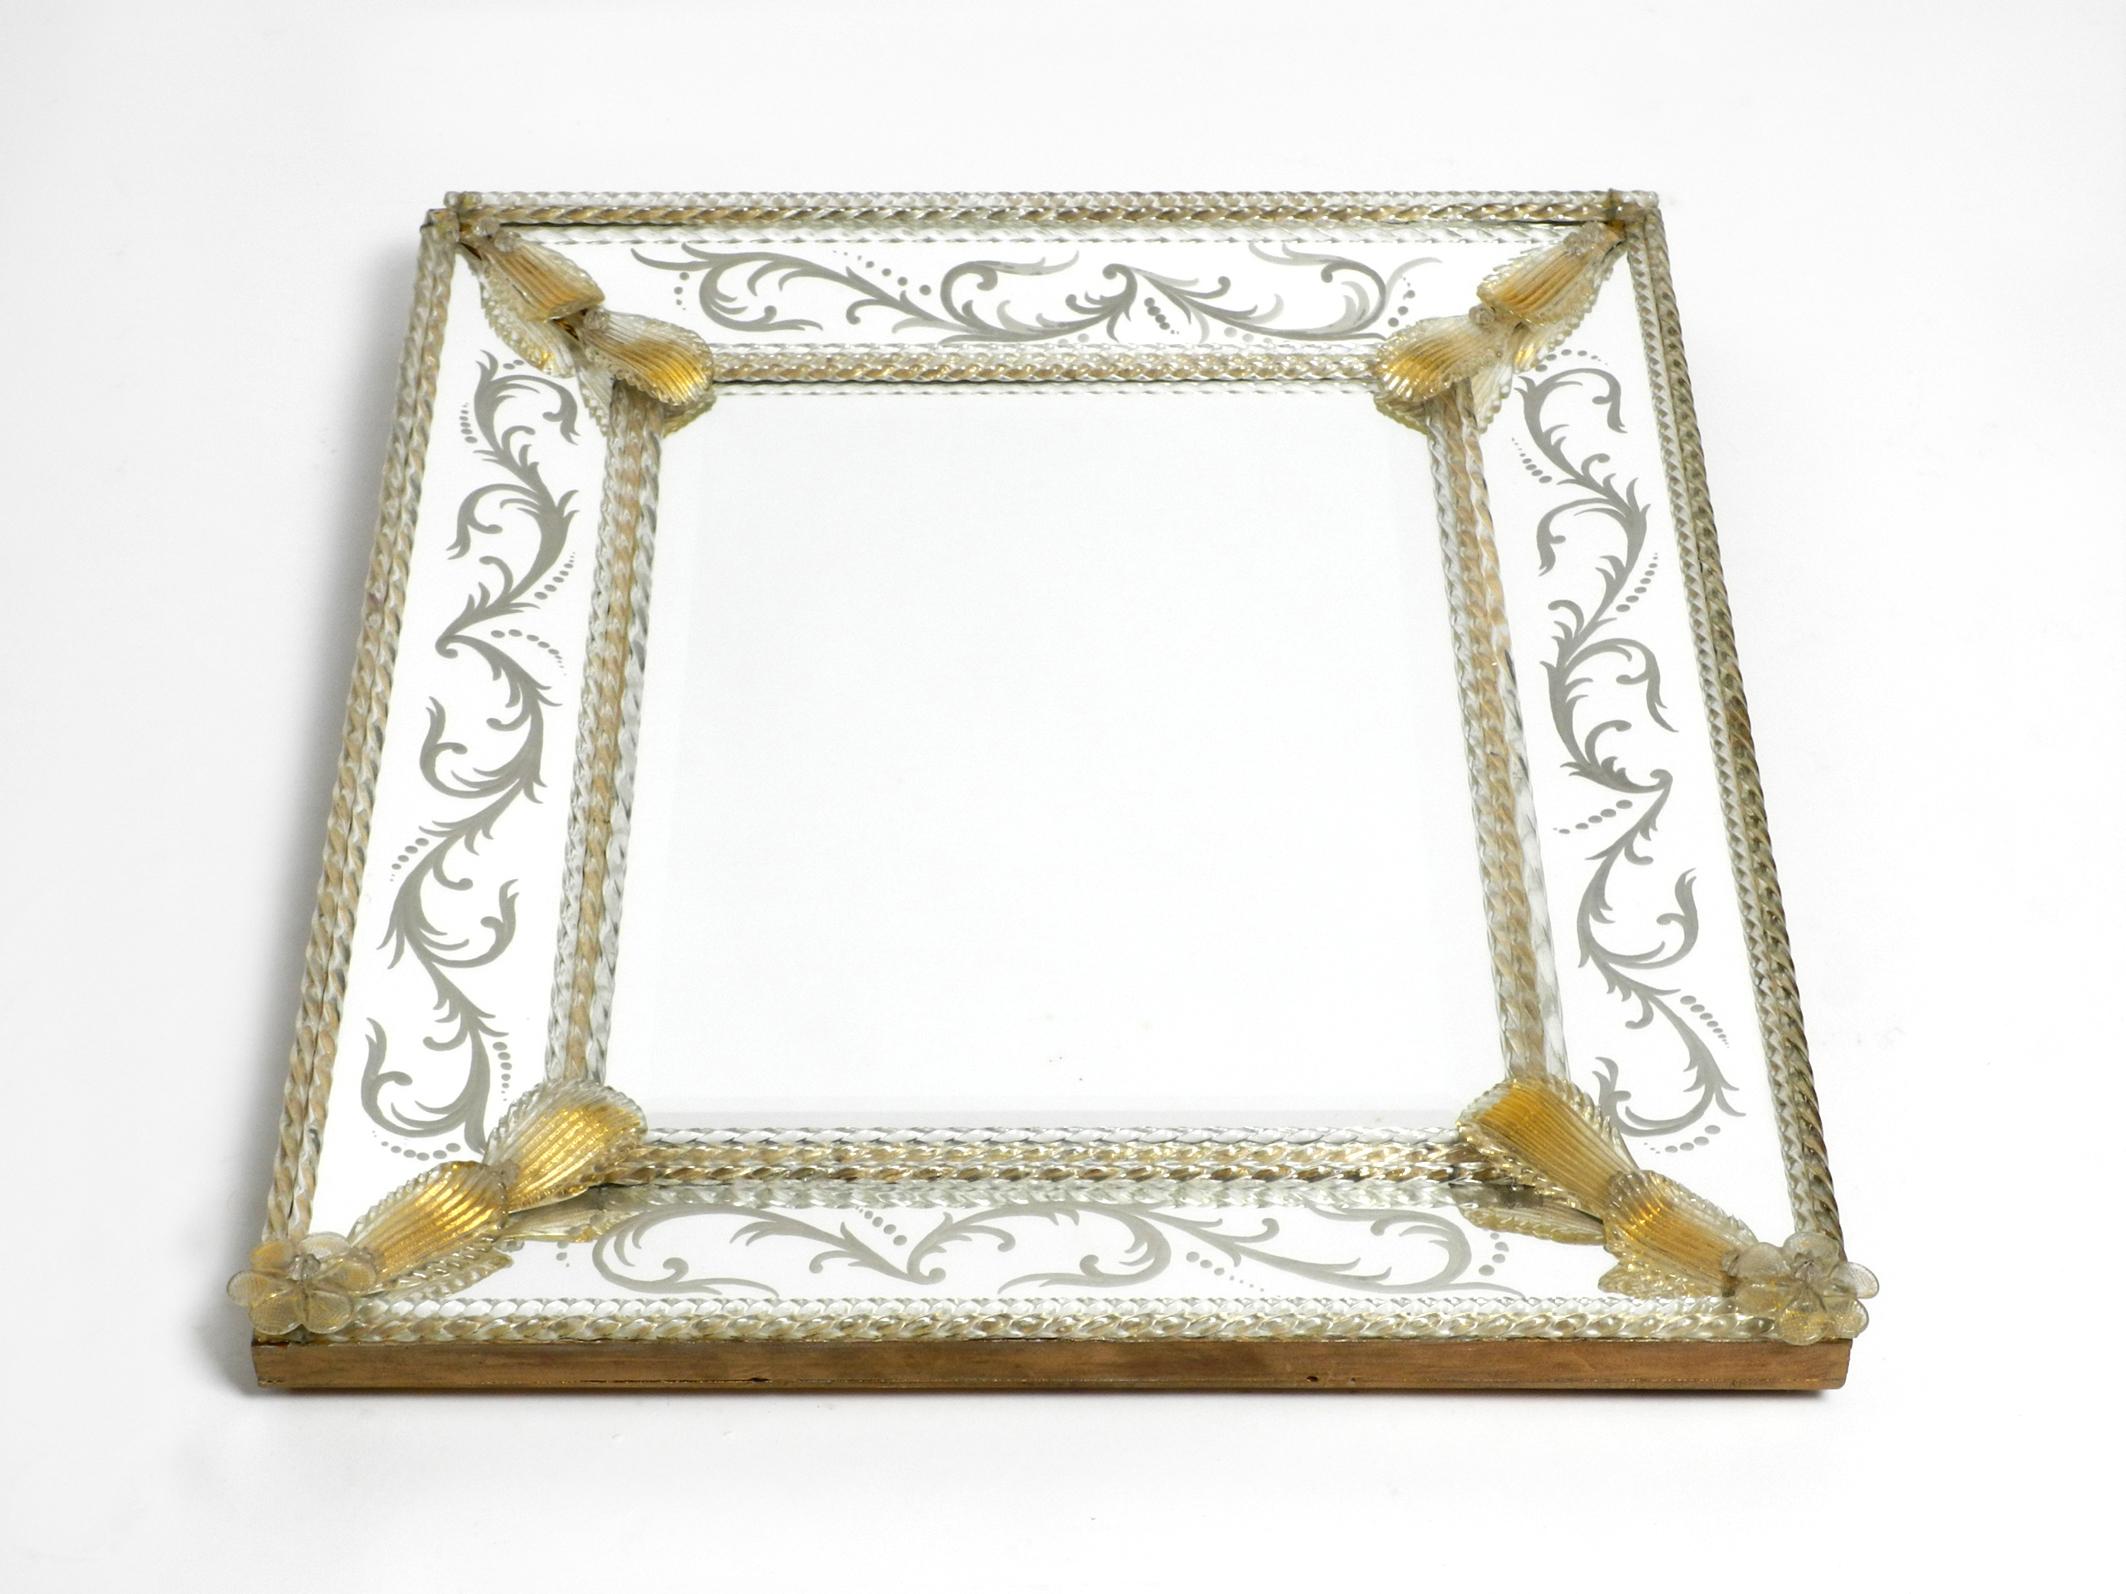 Italian Midcentury Wall Mirror with Murano Glass Frame by Barovier & Toso In Good Condition For Sale In München, DE